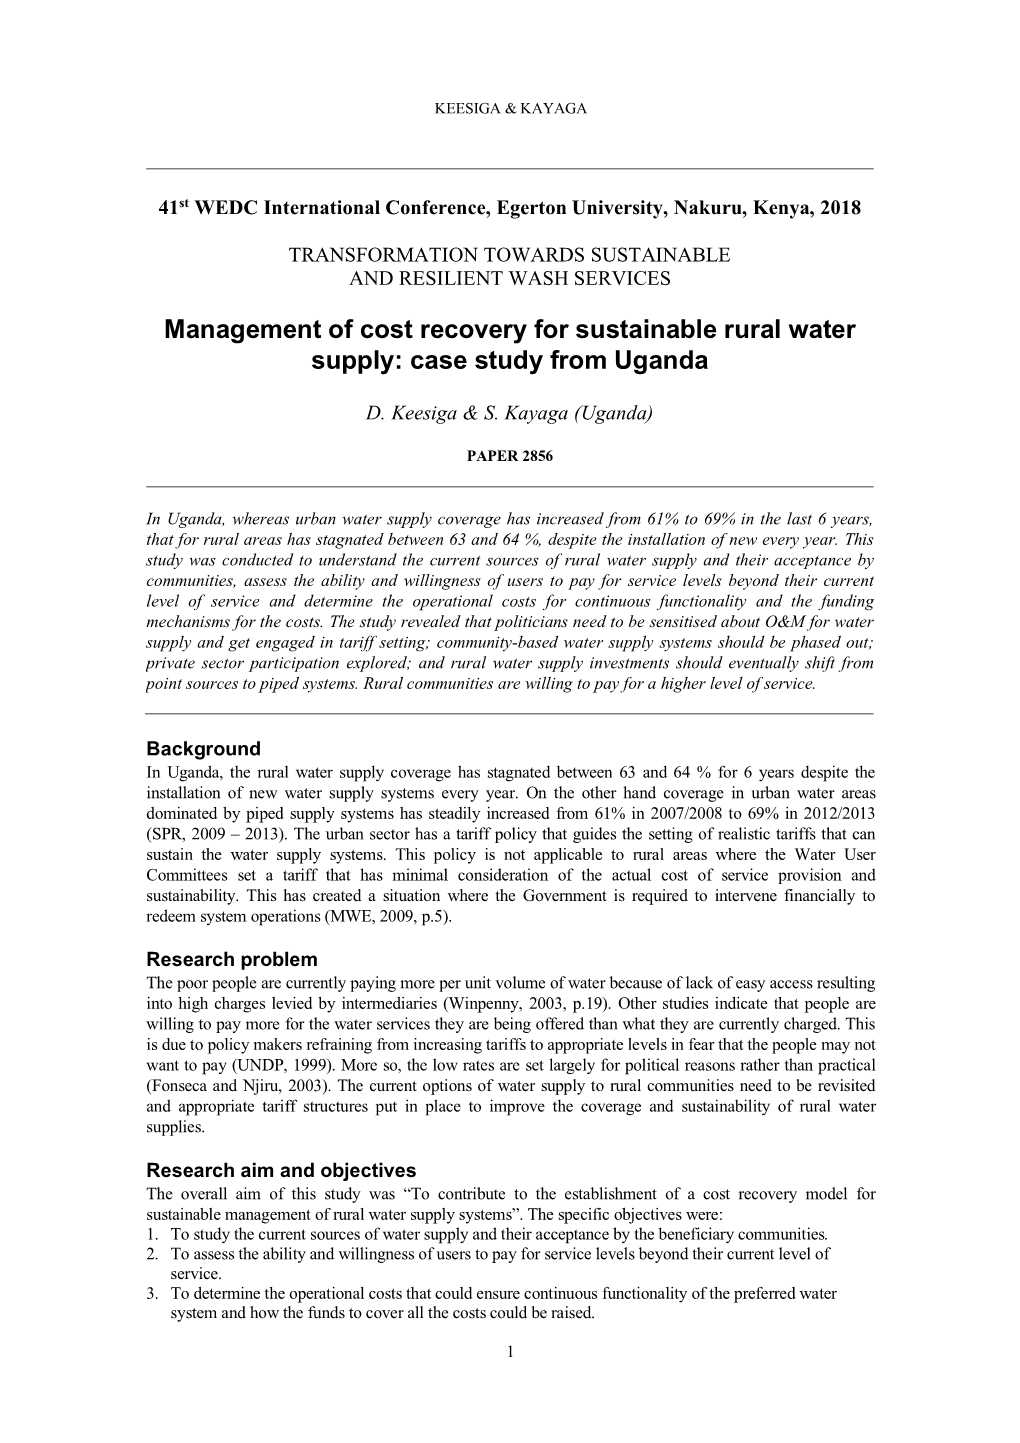 Management of Cost Recovery for Sustainable Rural Water Supply: Case Study from Uganda